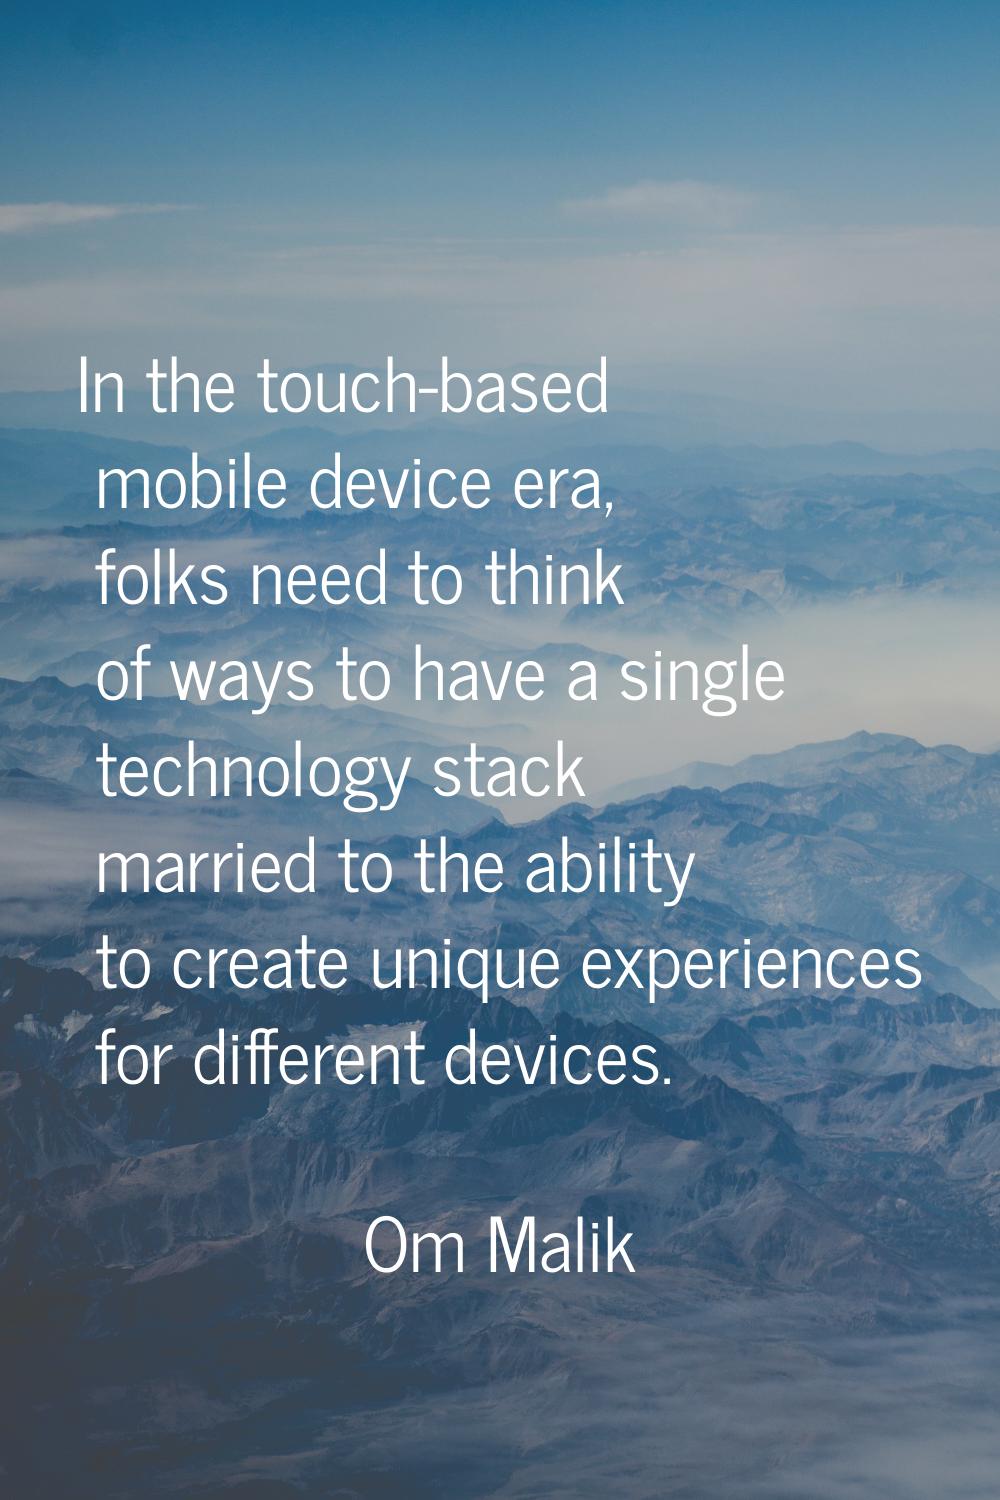 In the touch-based mobile device era, folks need to think of ways to have a single technology stack